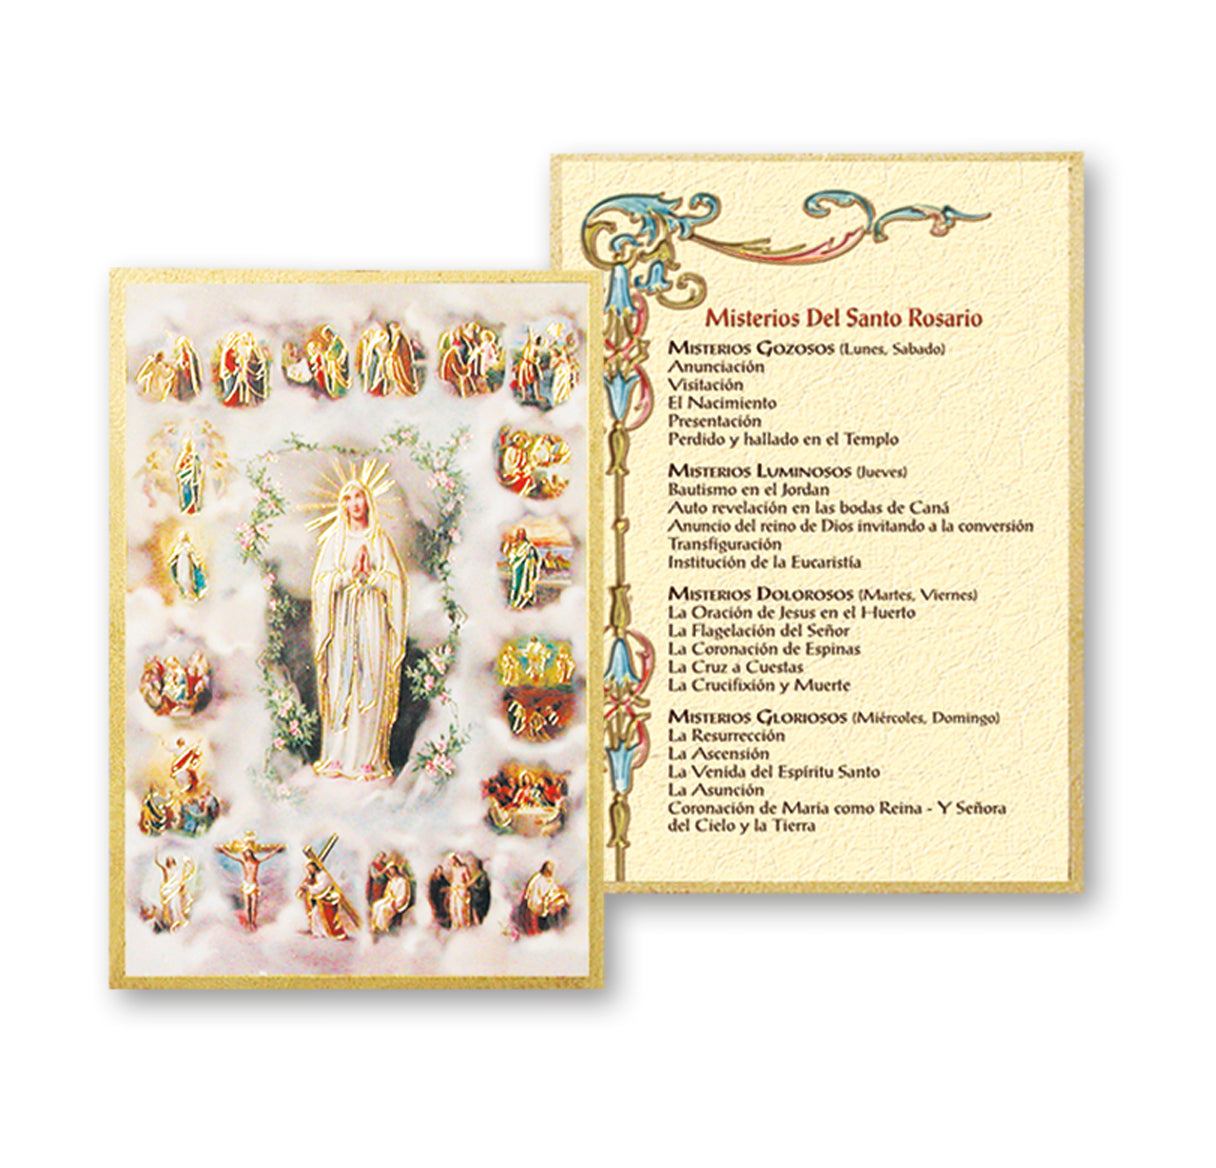 Mysteries of the Rosary (Spanish) Gold Foil Mosaic Plaque